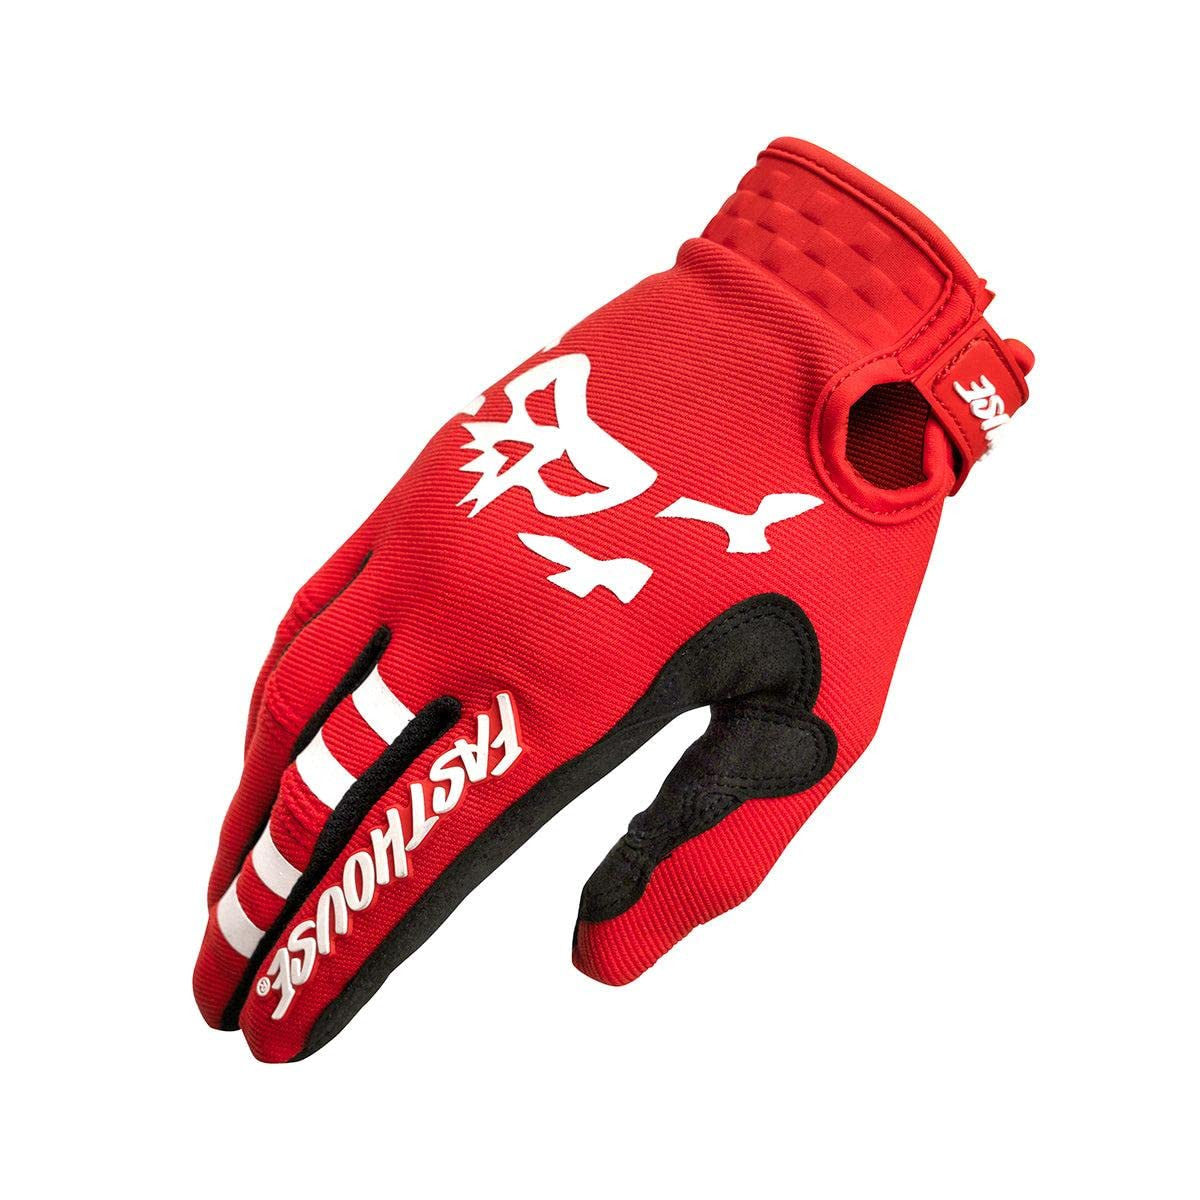 Fasthouse Youth Speed Style Glove Slammer - Red Bike Gloves